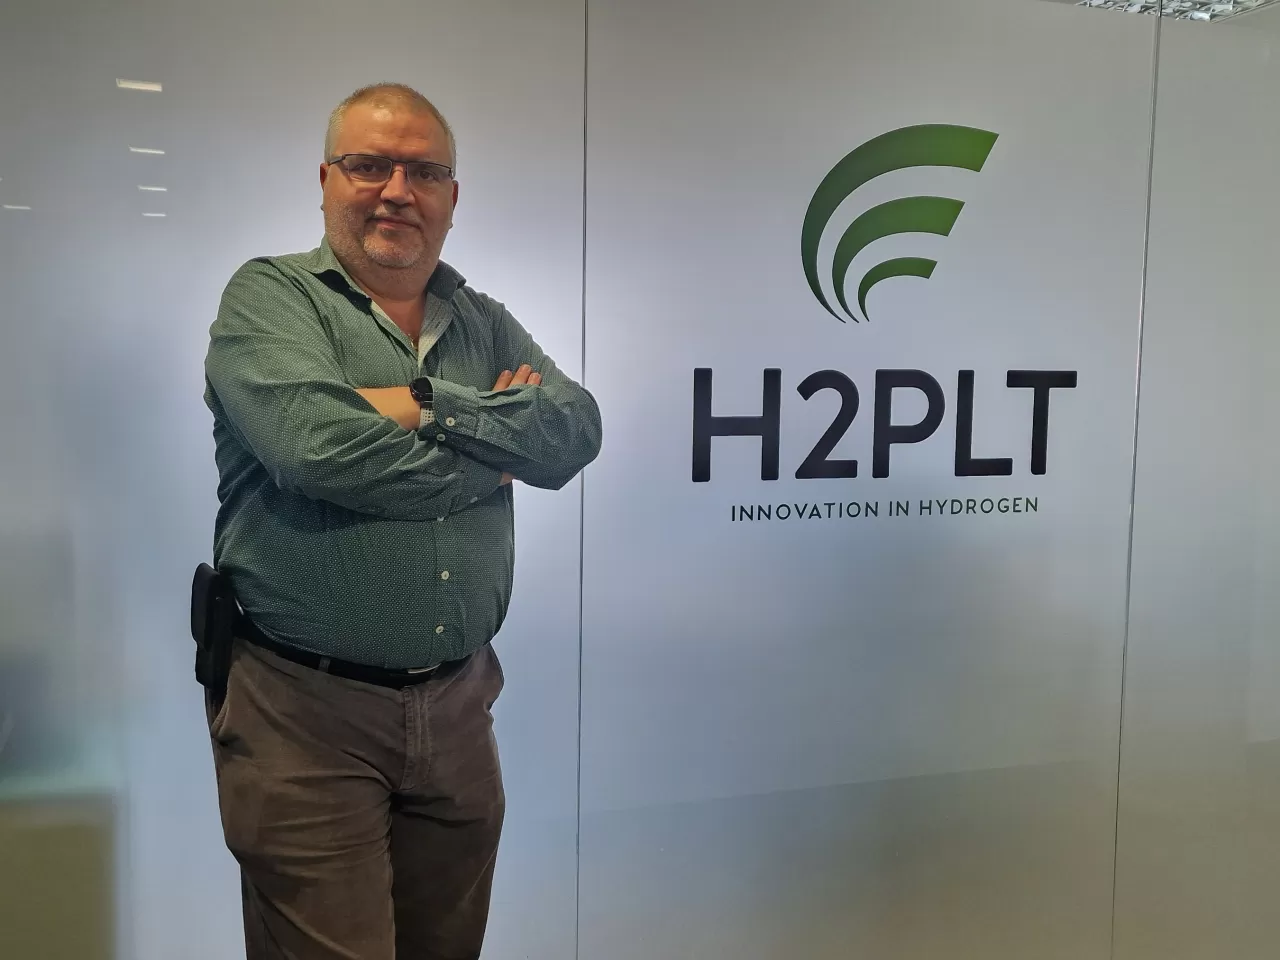 Sisco Sapena launches H2PLT, the company behind Spain's first green hydrogen microgeneration network